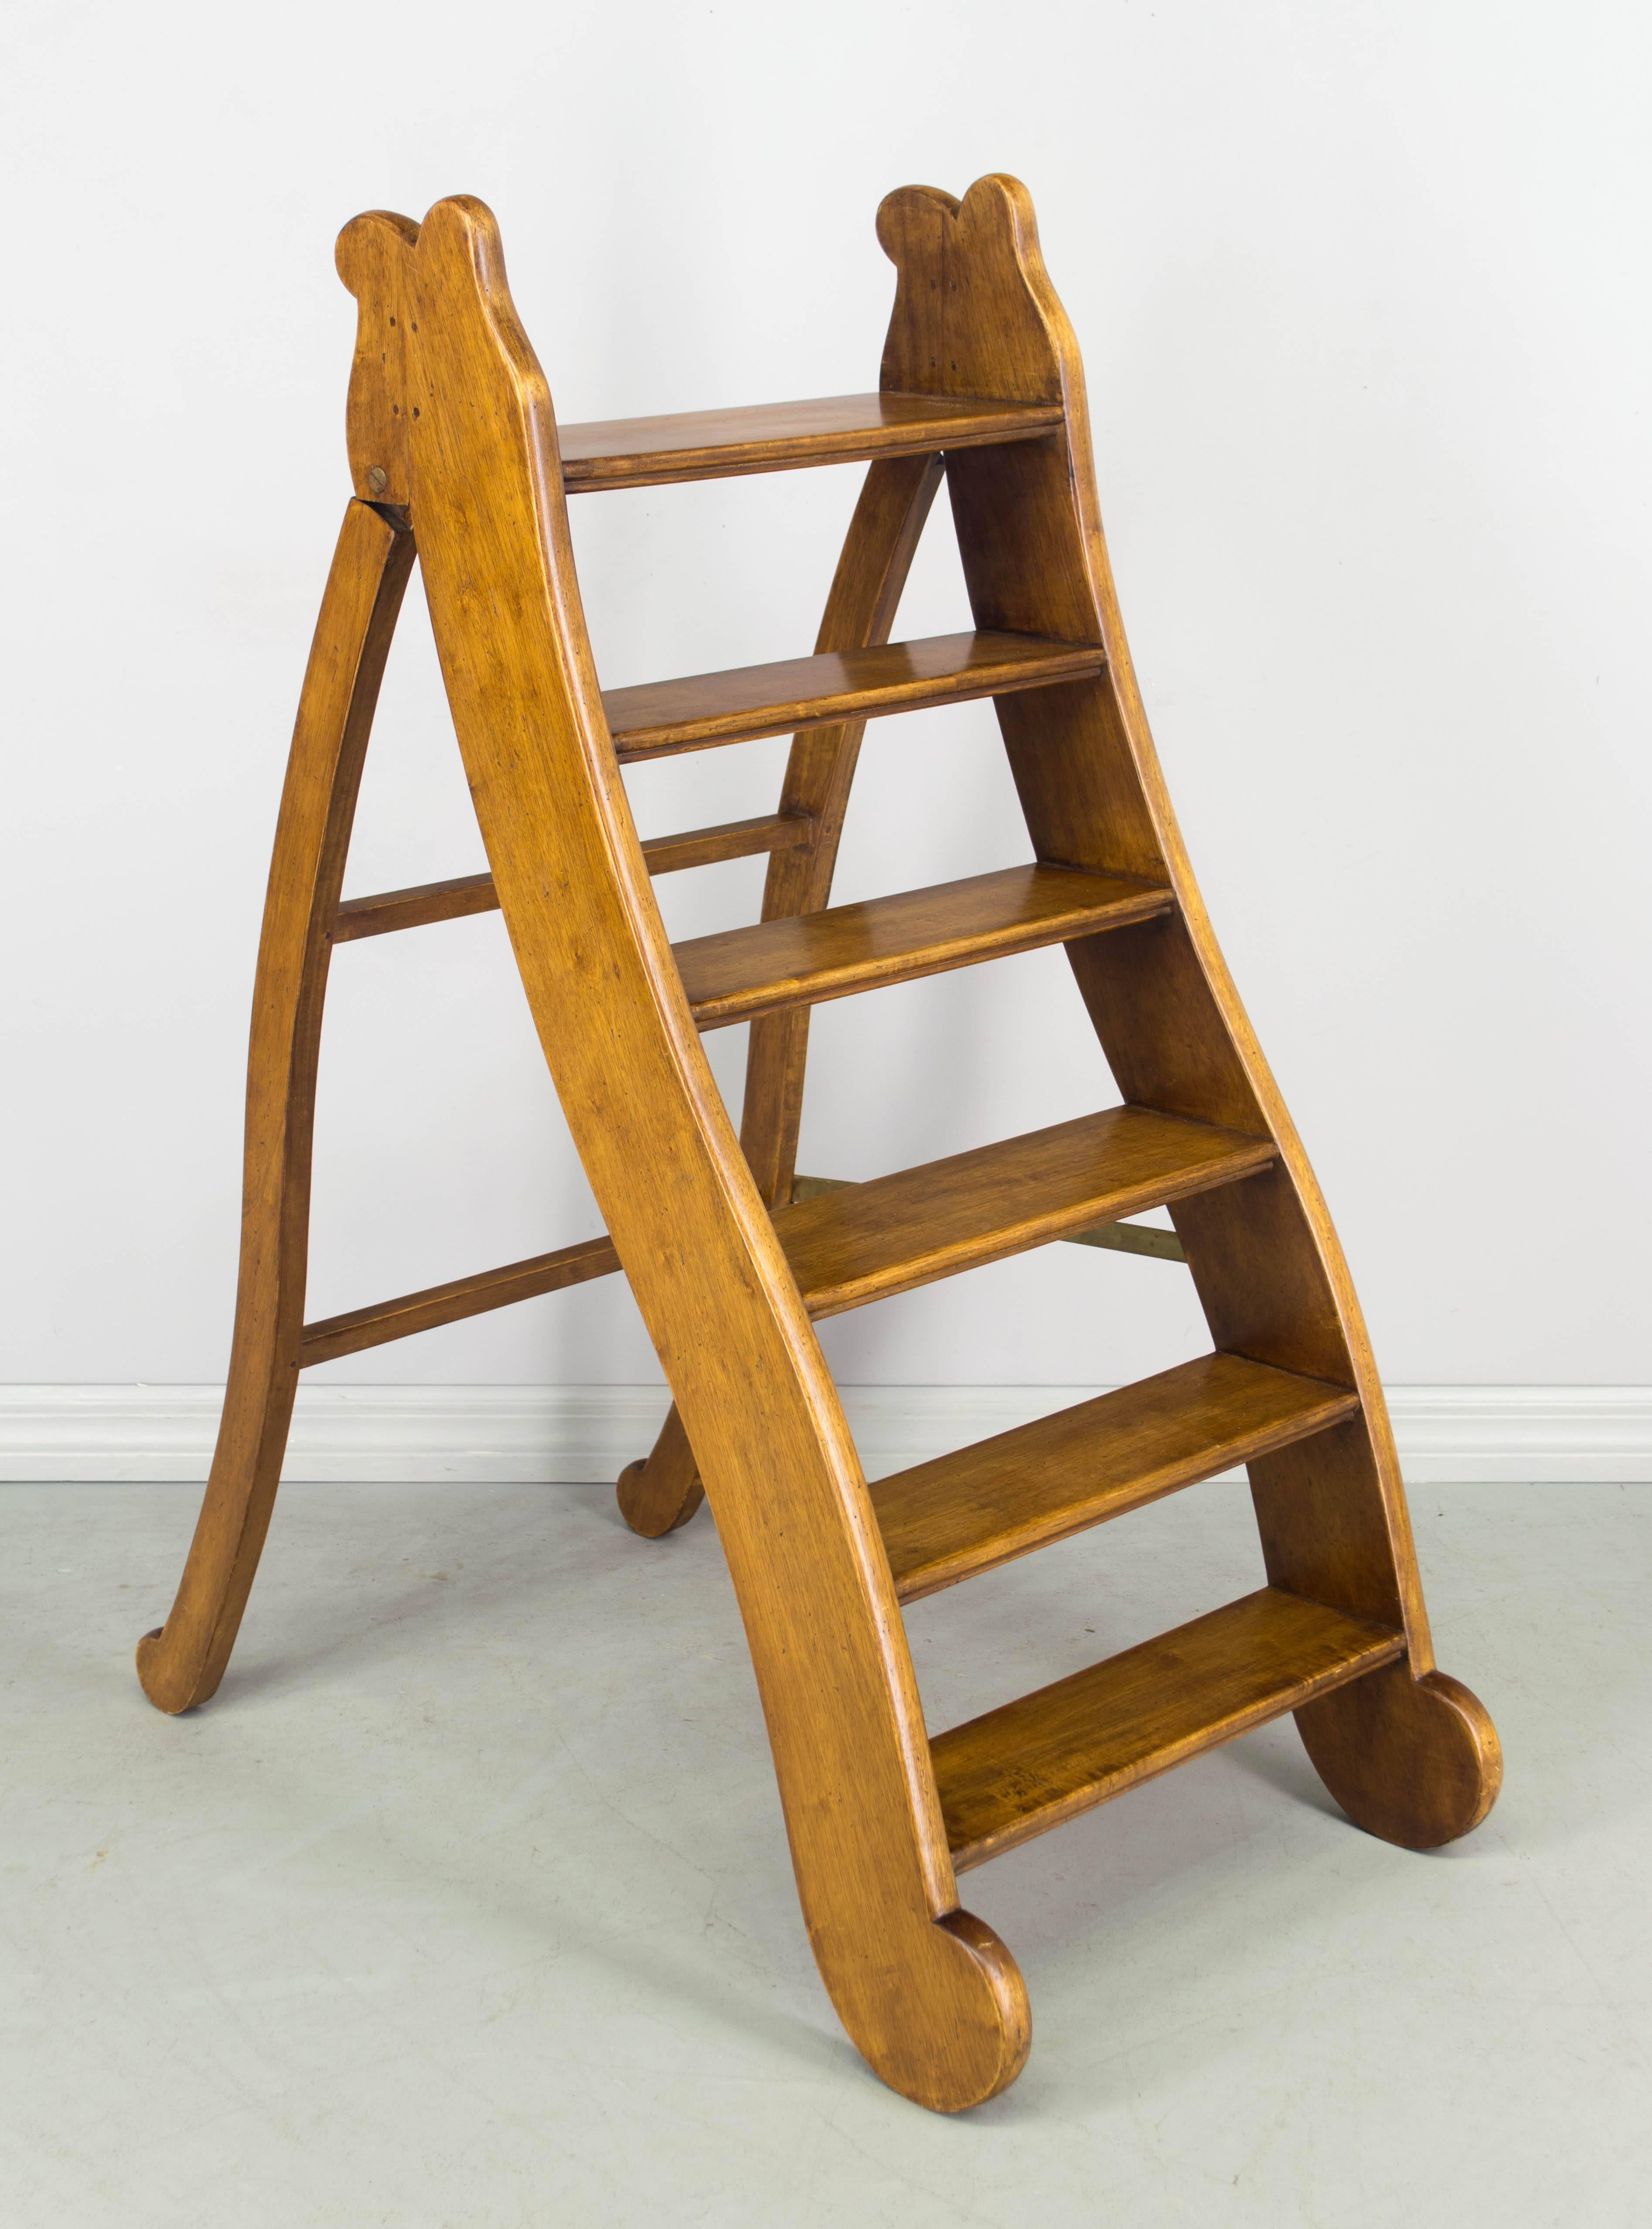 19th century French folding library ladder with nice curving shape. Made of solid, 1